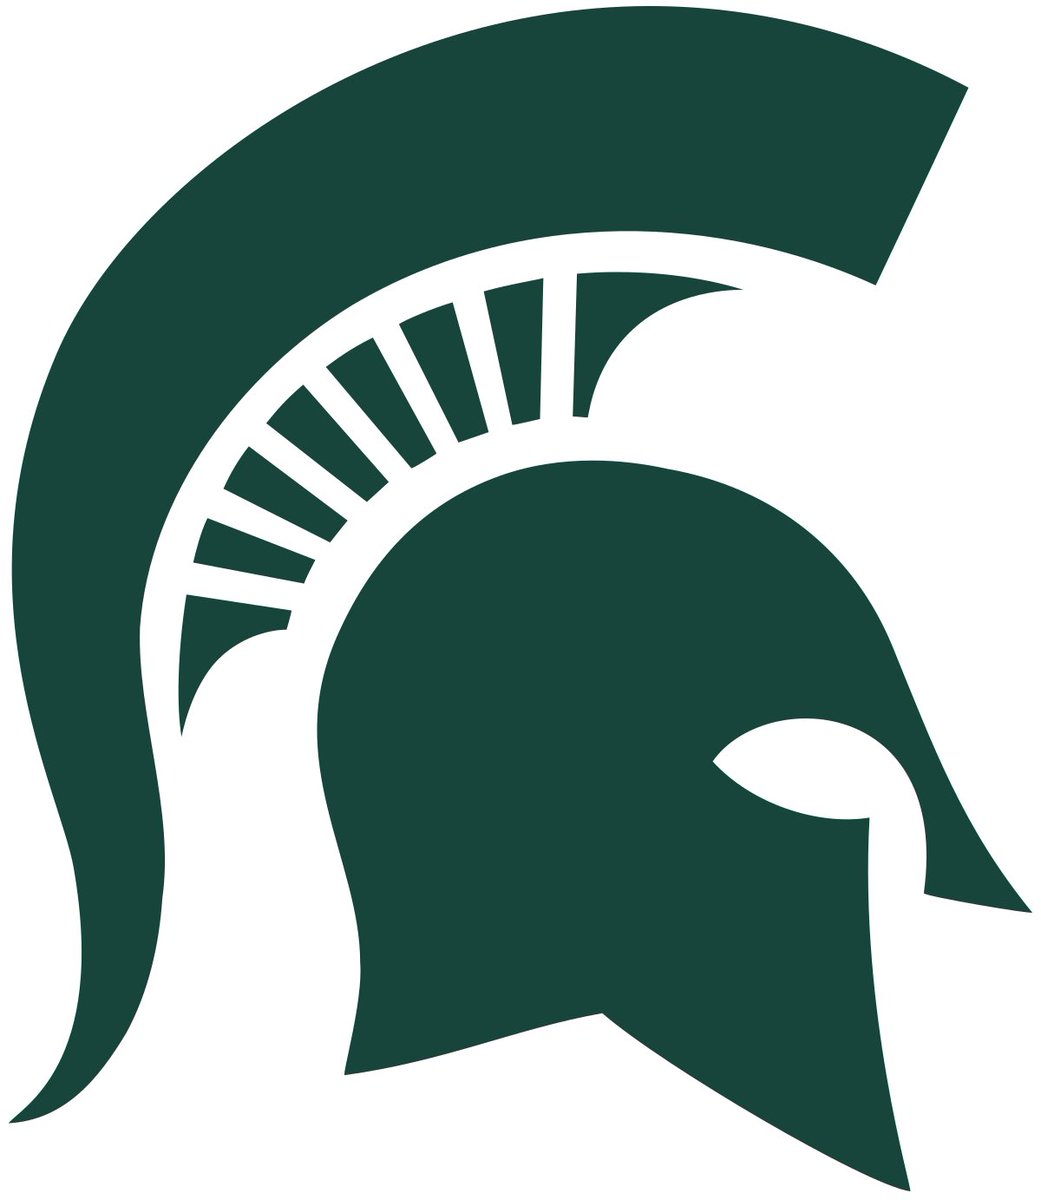 I will be taking an Official Visit to @MSU_Football on December 15-17 @Coach_Smith @CoachAdamsOSU @ryanobleness @msucontent @adamgorney @MohrRecruiting @JeremyO_Johnson @JustinThind